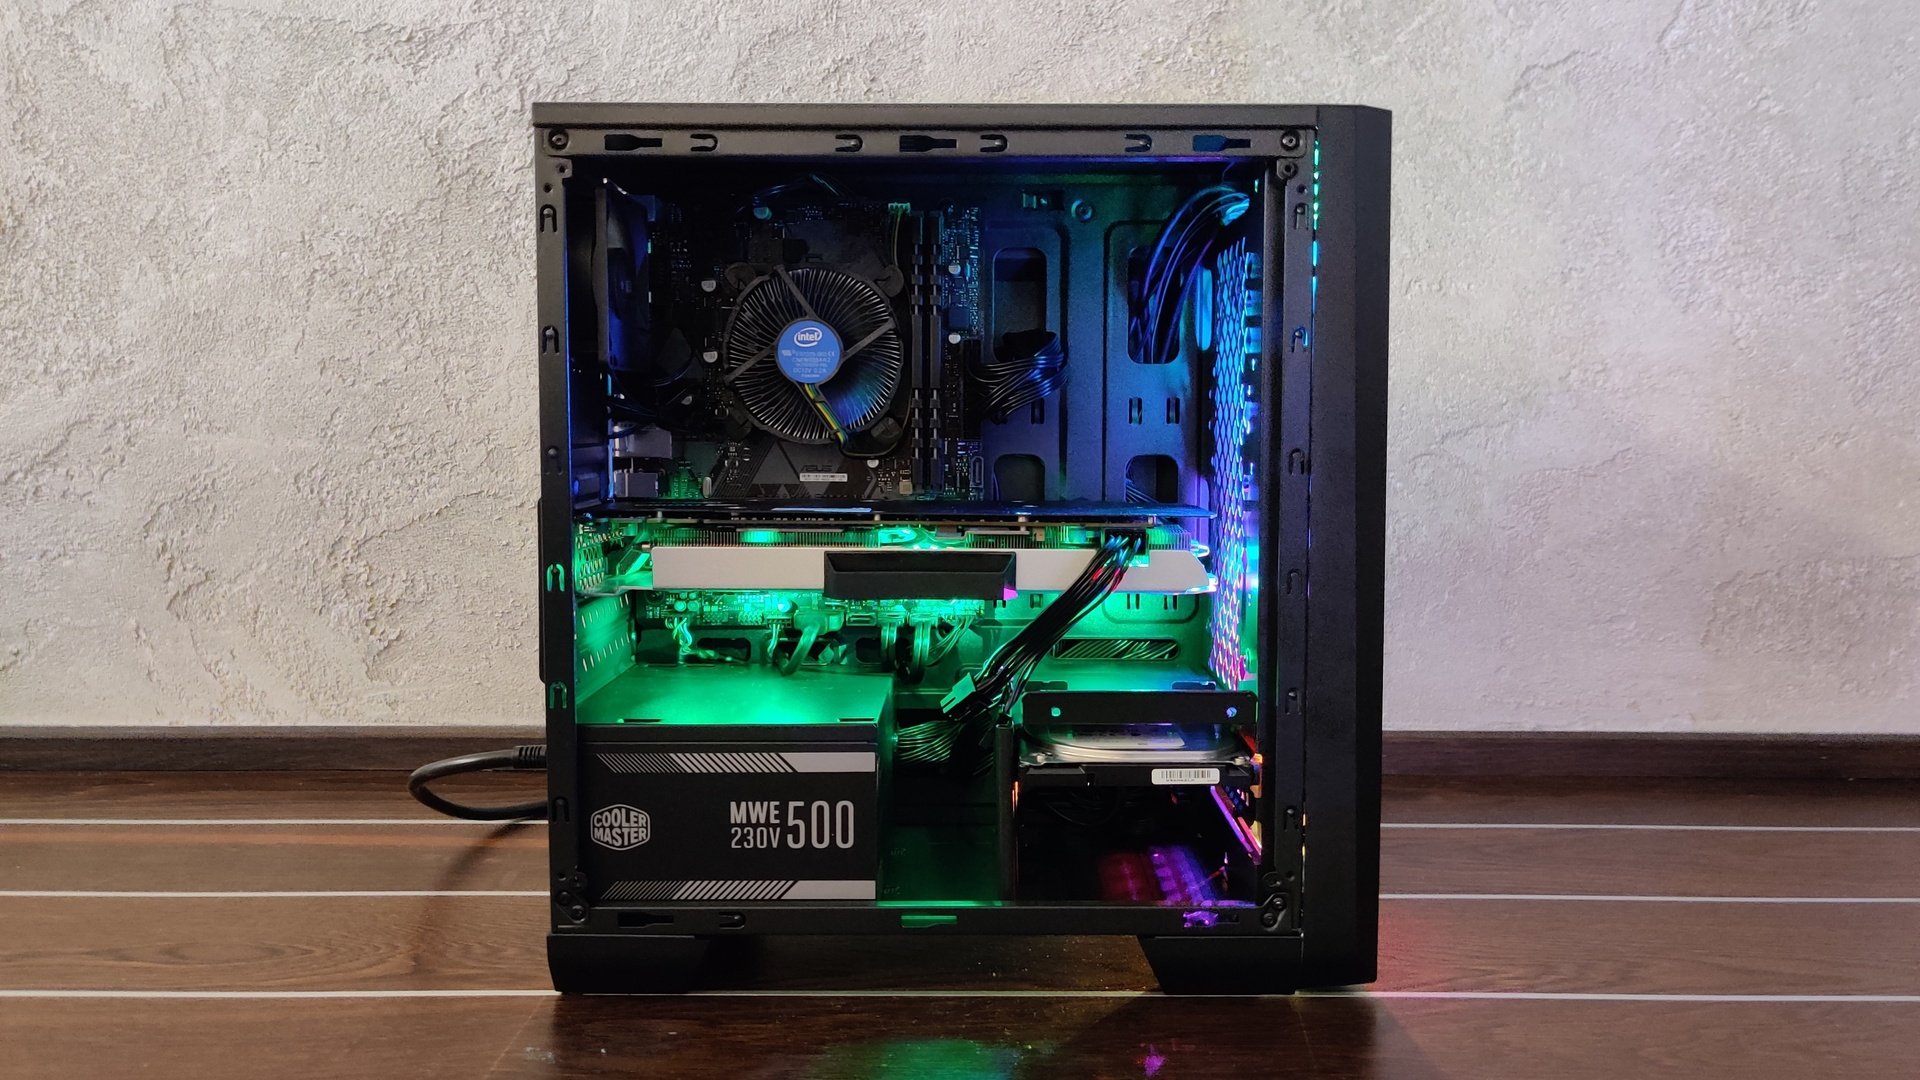 ergonomic Best Gaming Pc Builds Under 700 for Streaming